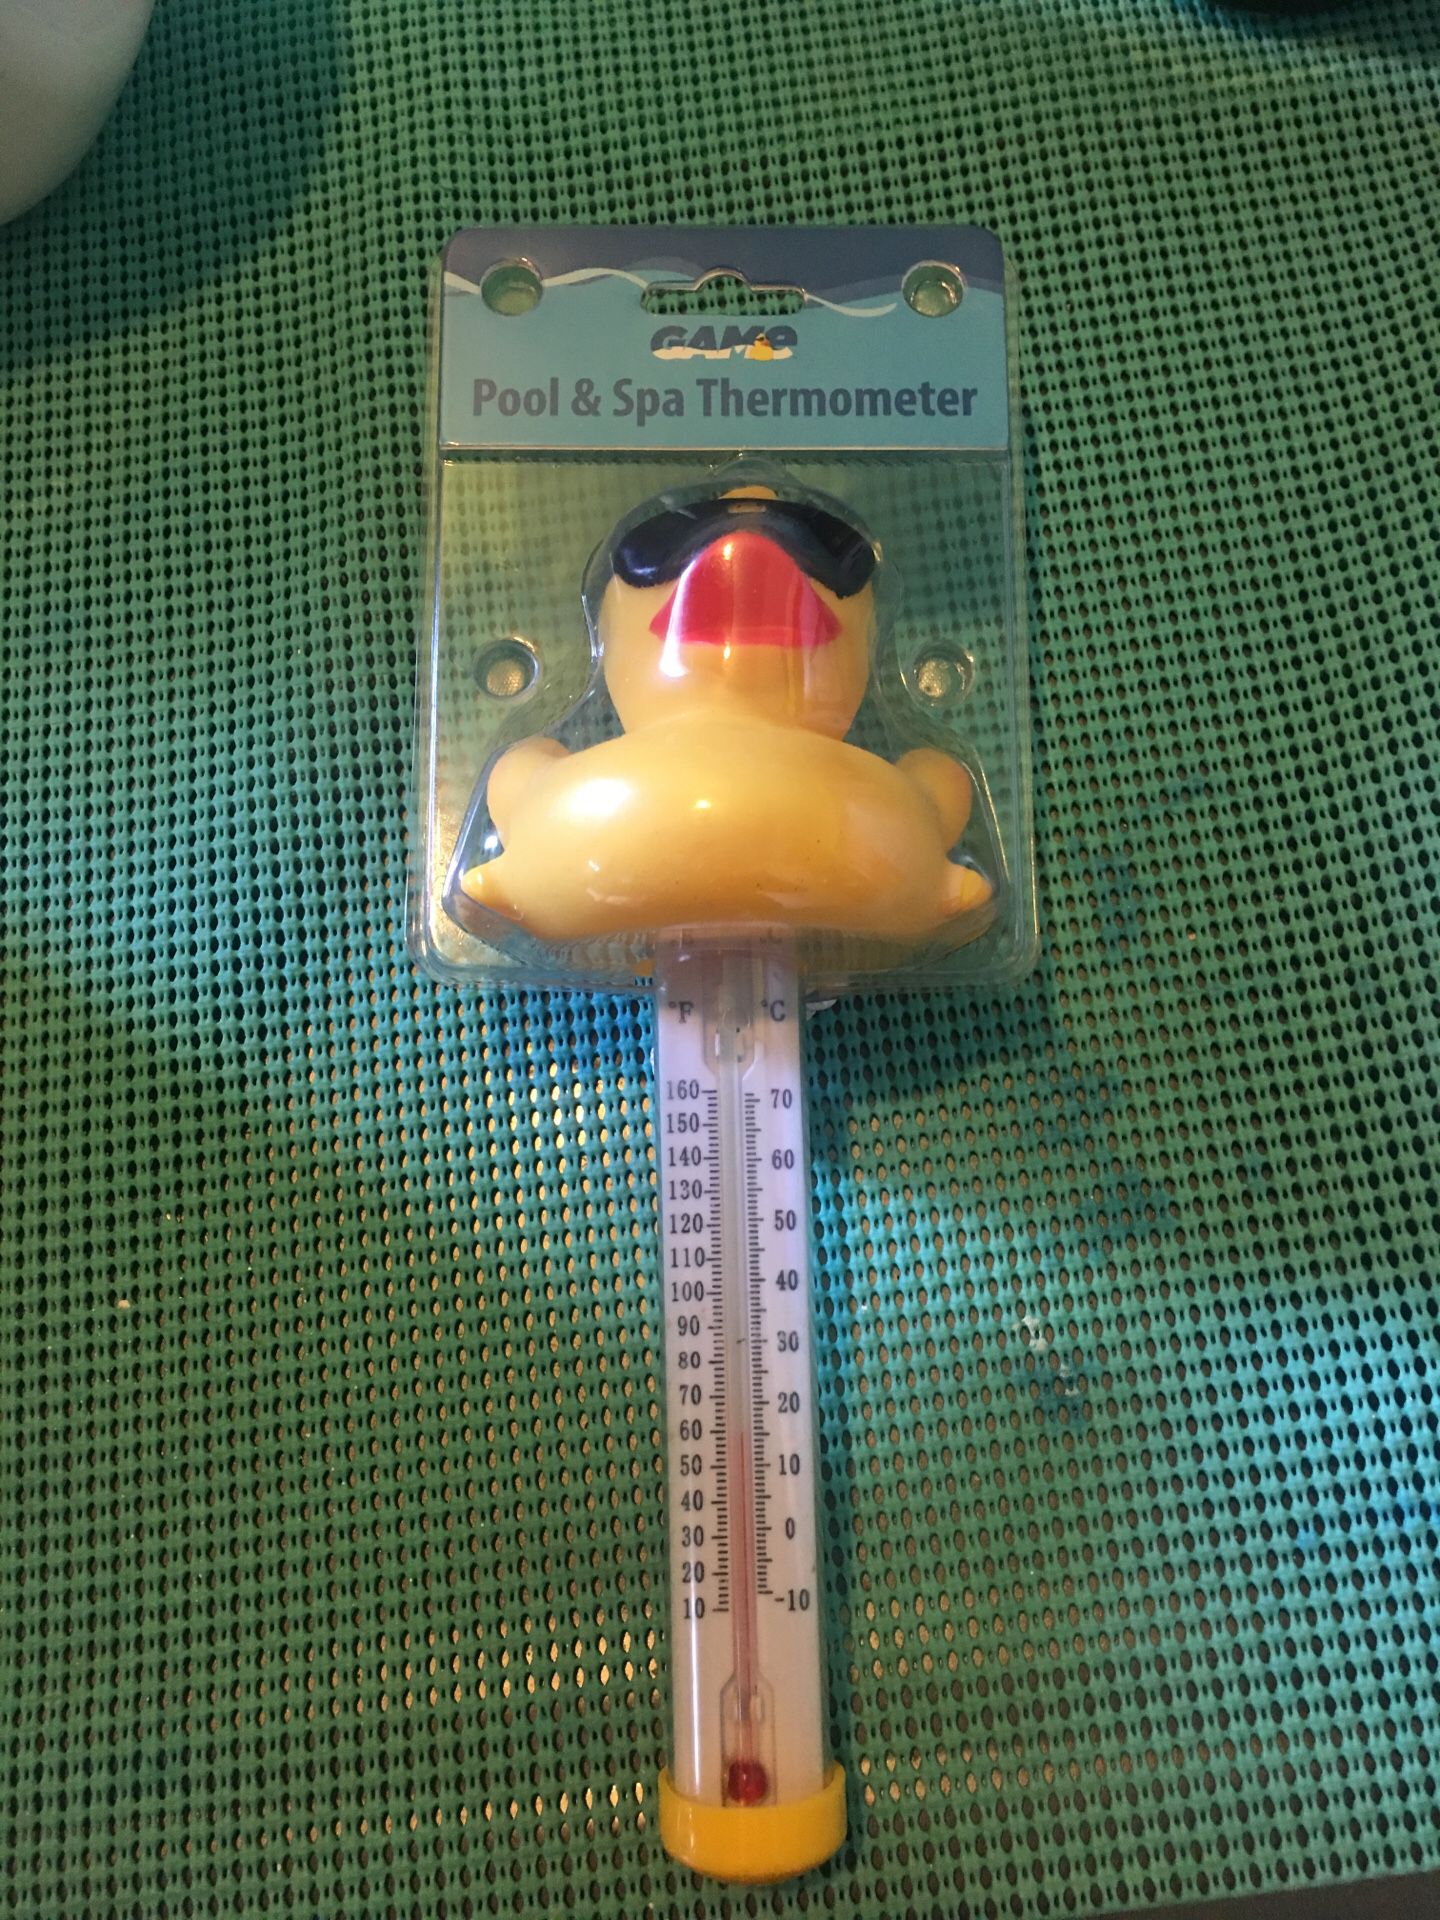 Pool and spa thermometer new in package